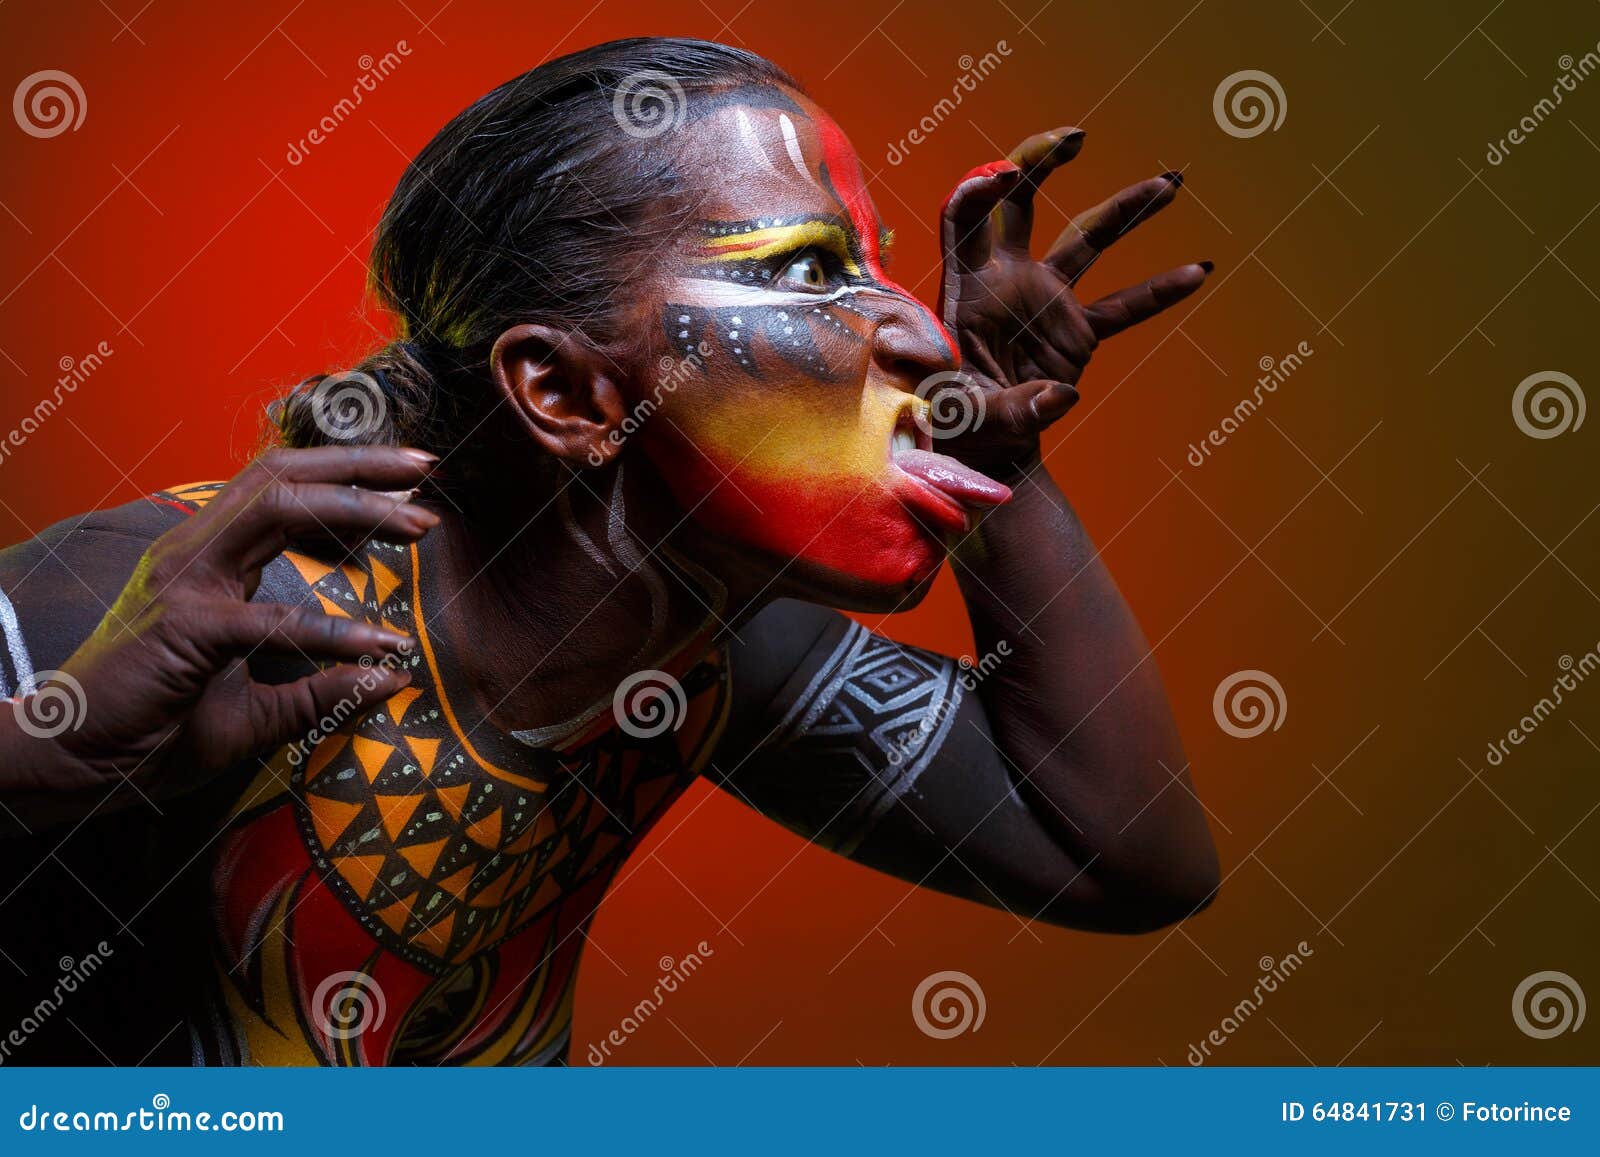 bodypainting. woman painted with ethnic patterns